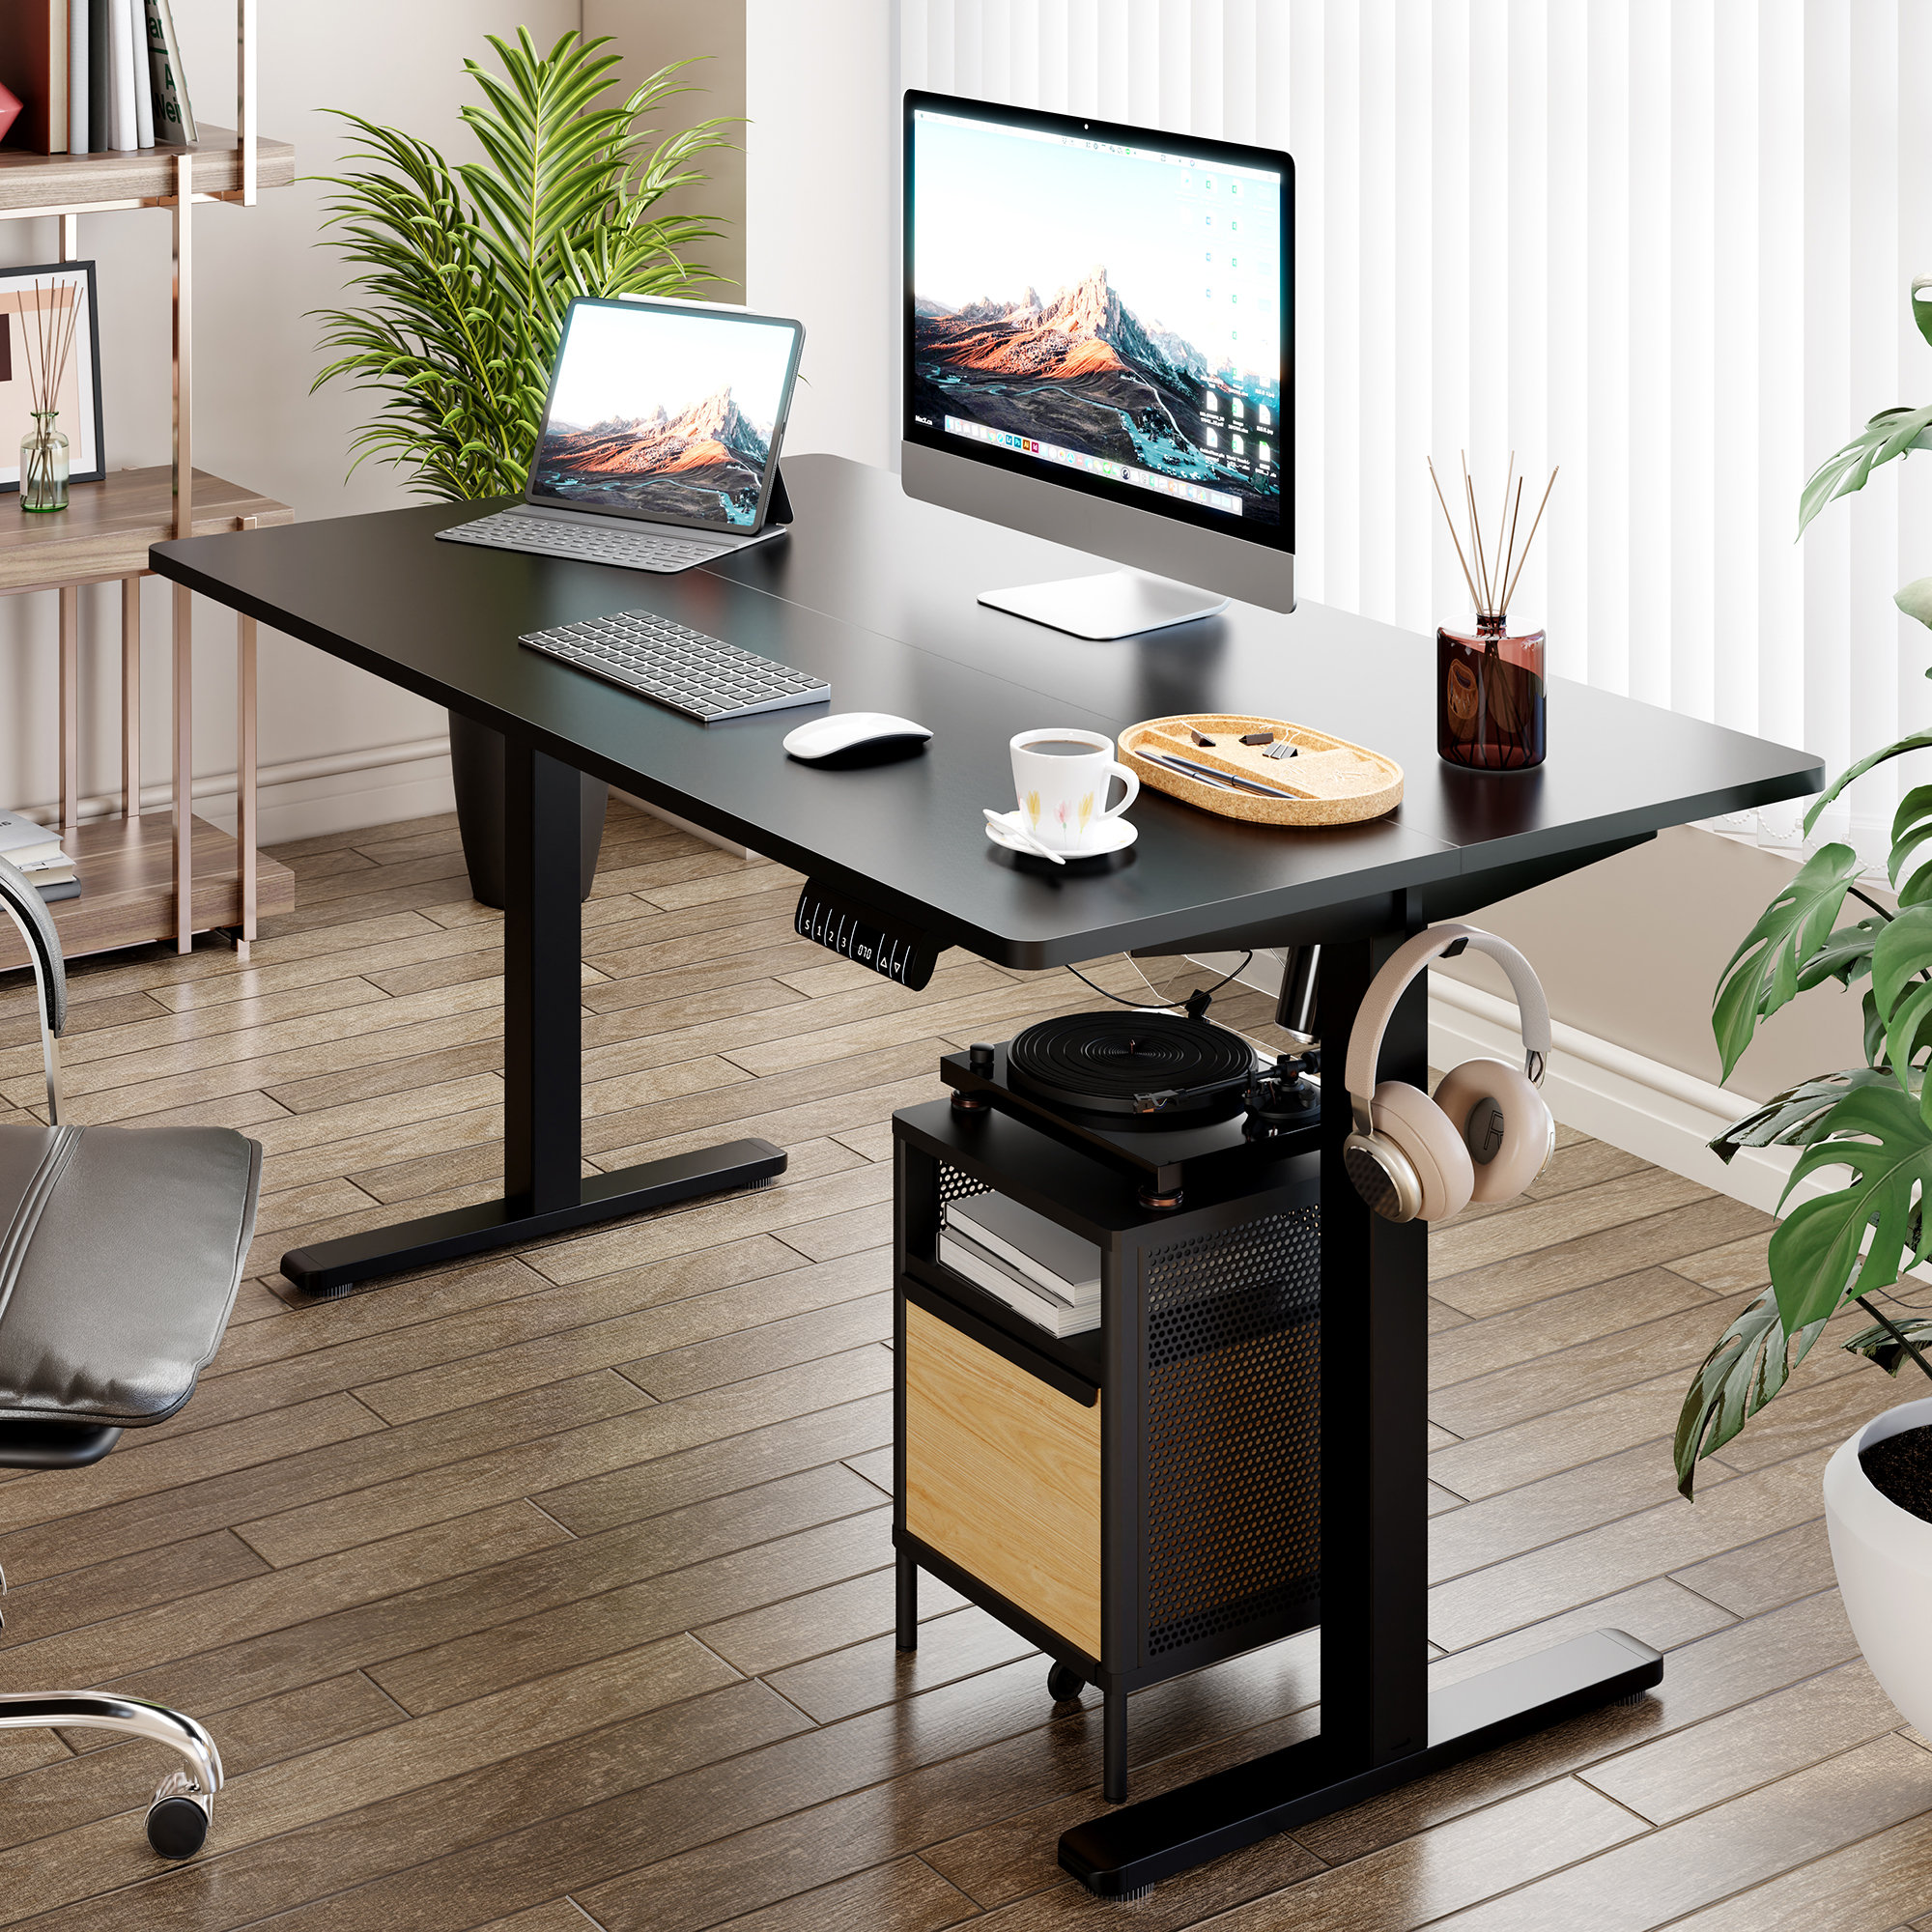 Fashionable Friday: Kendi Everyday - The Well-Appointed Desk